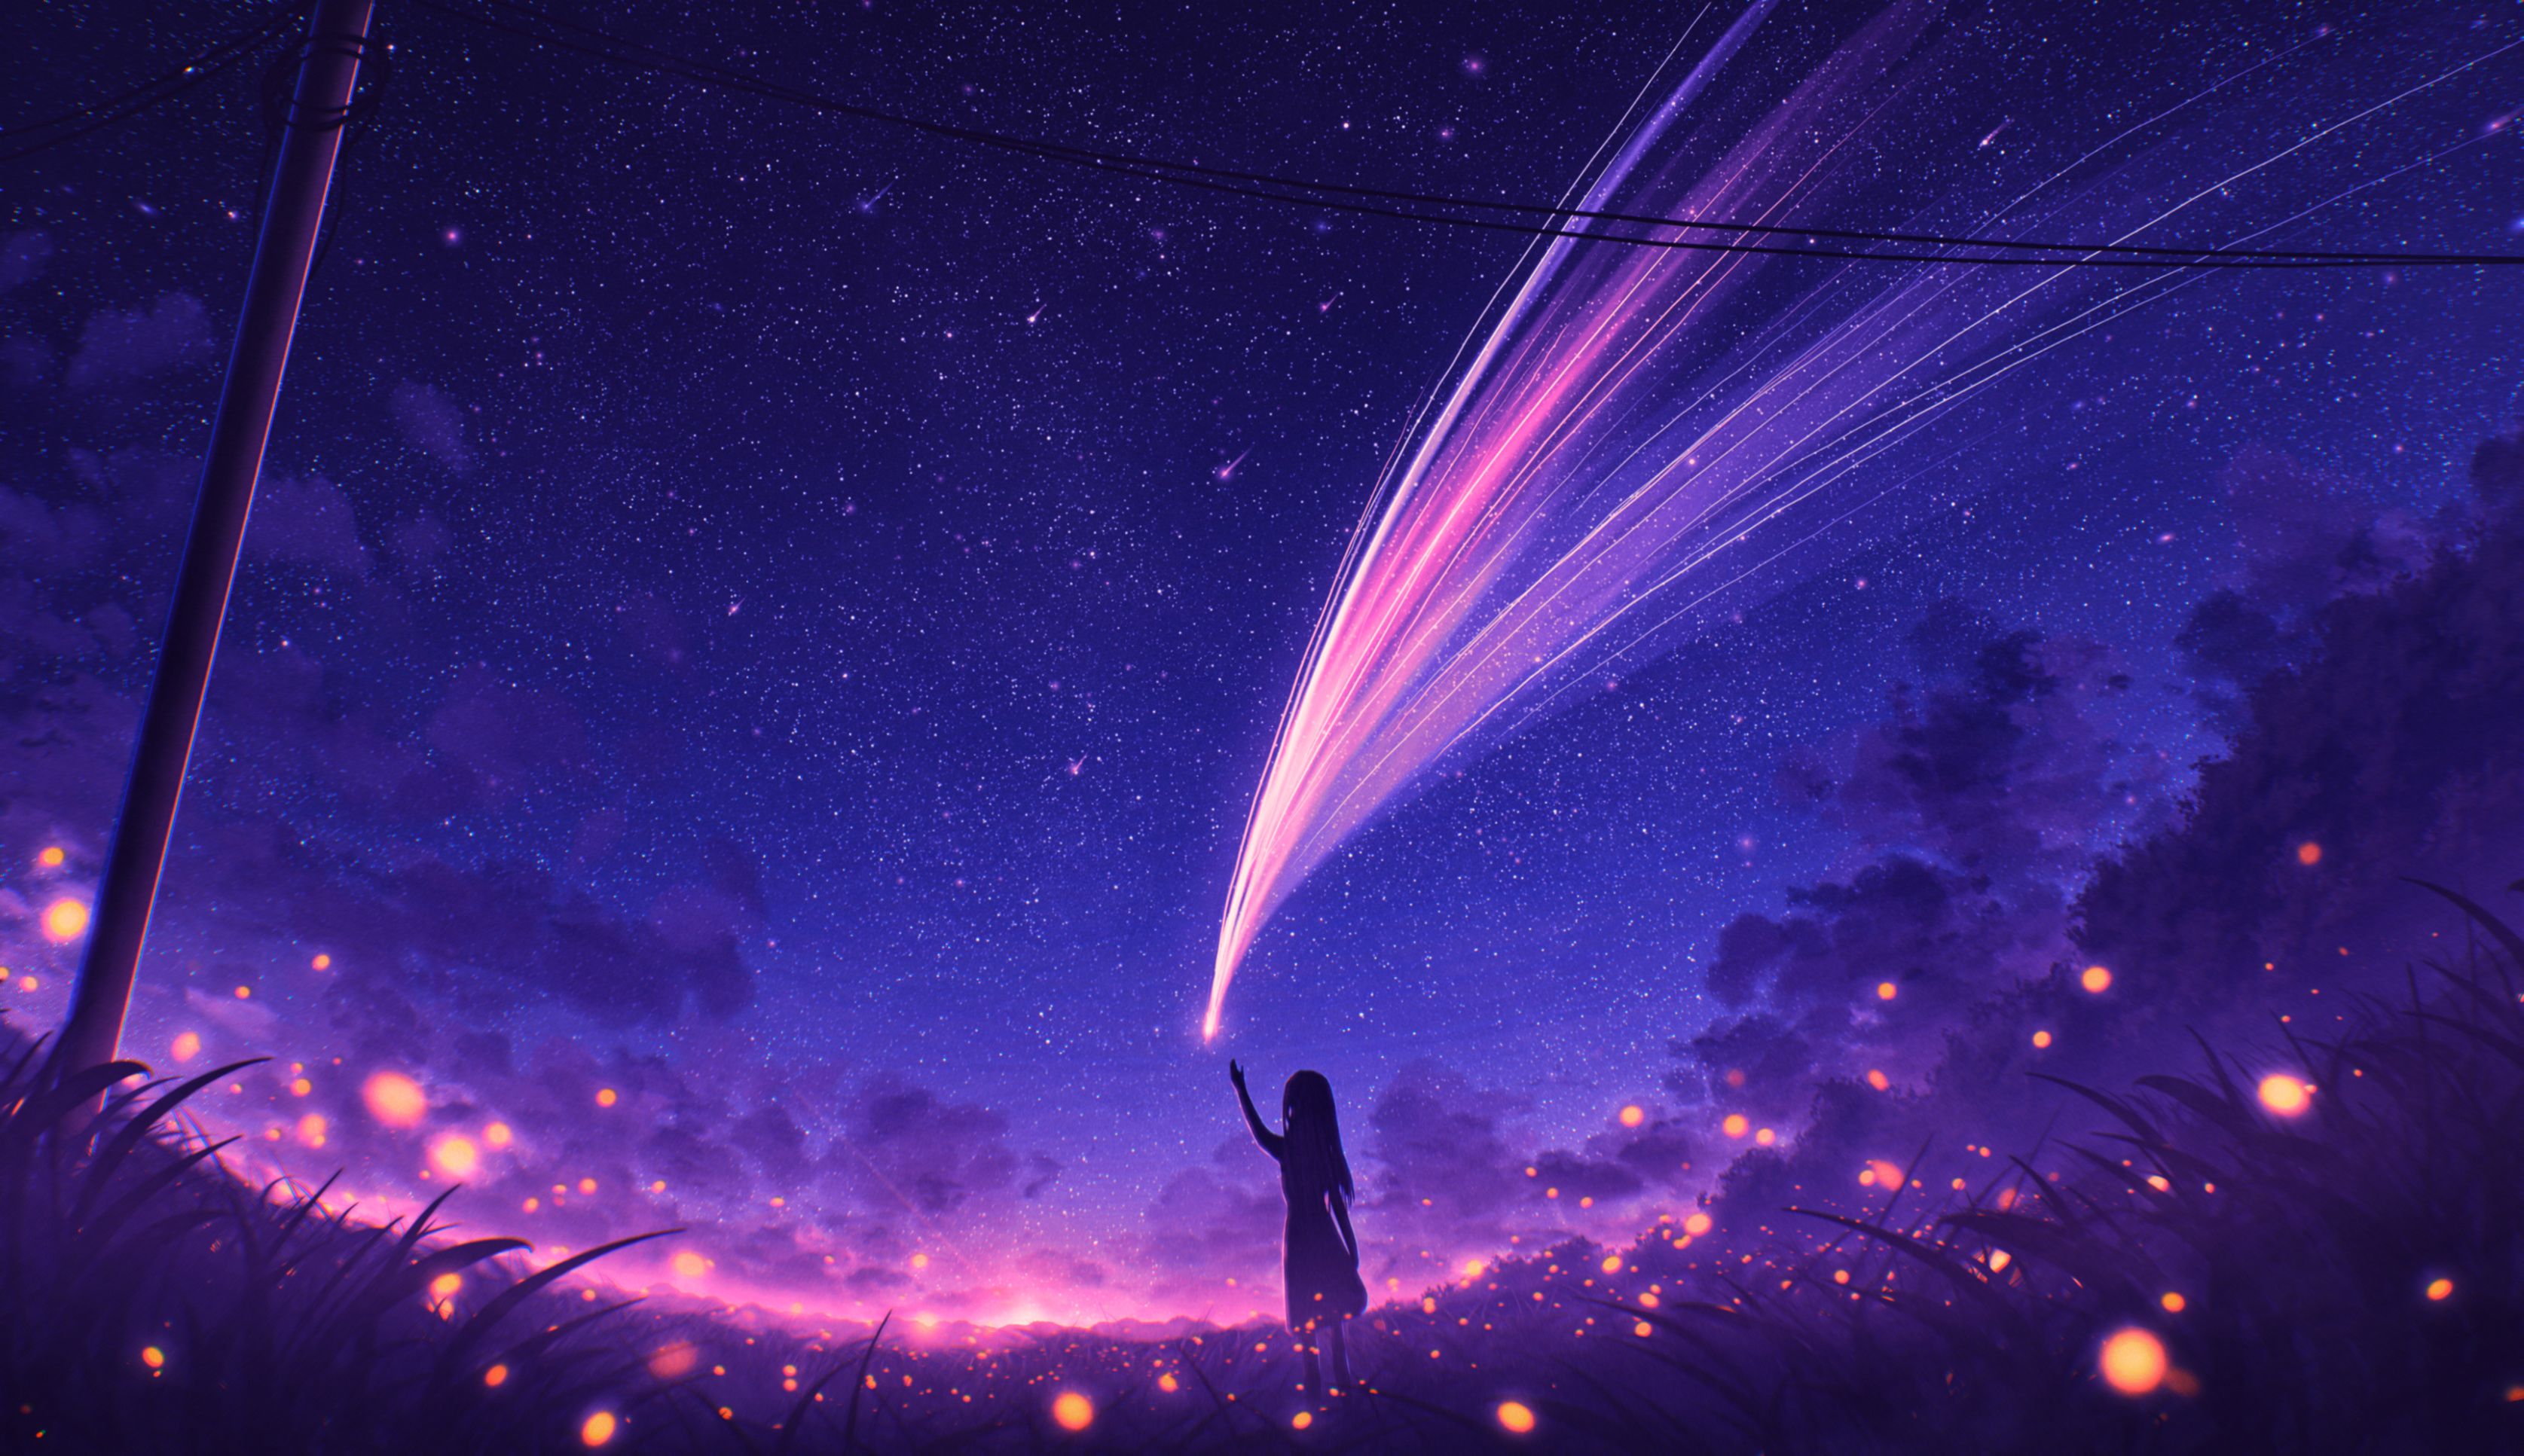 Anime Girl and Cool Starry Sky Wallpaper, HD Anime 4K Wallpaper, Image, Photo and Background